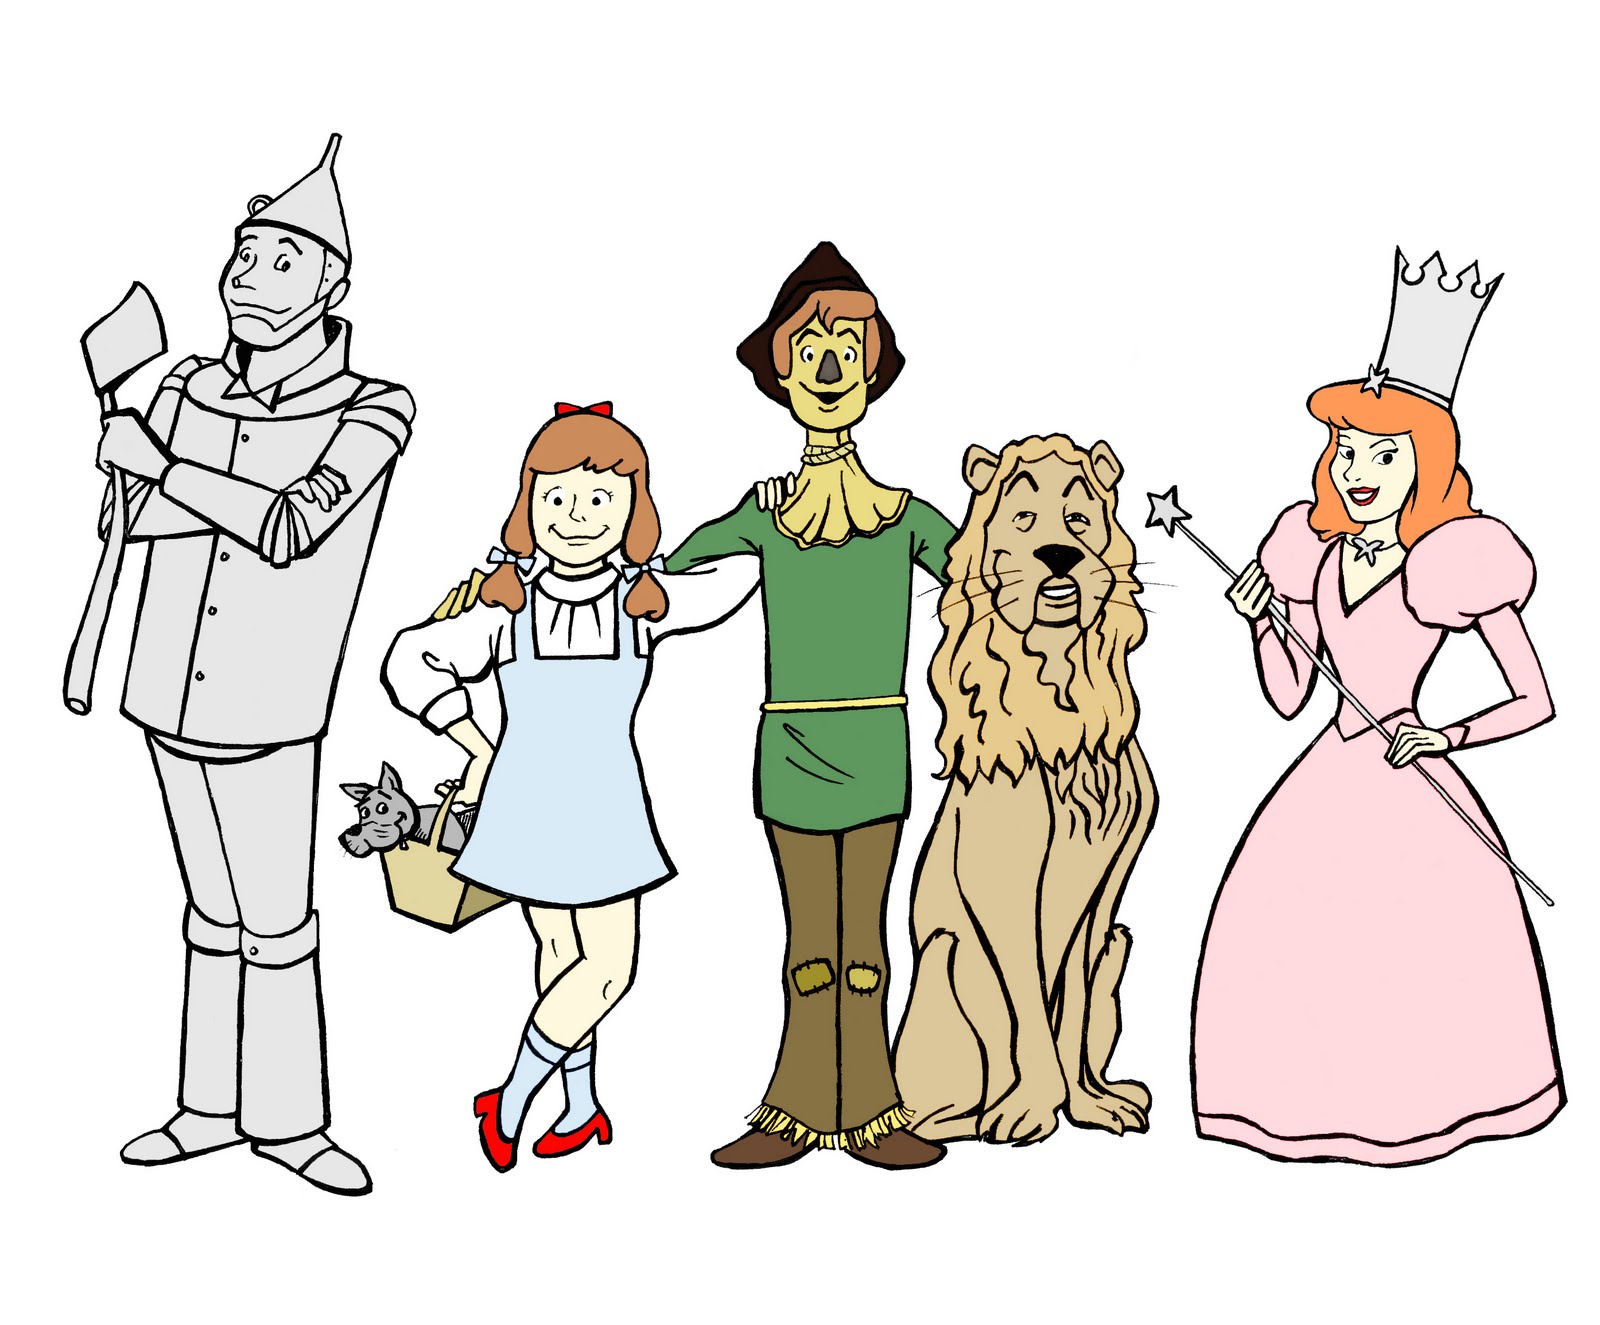 Wizard of oz clipart 9 2